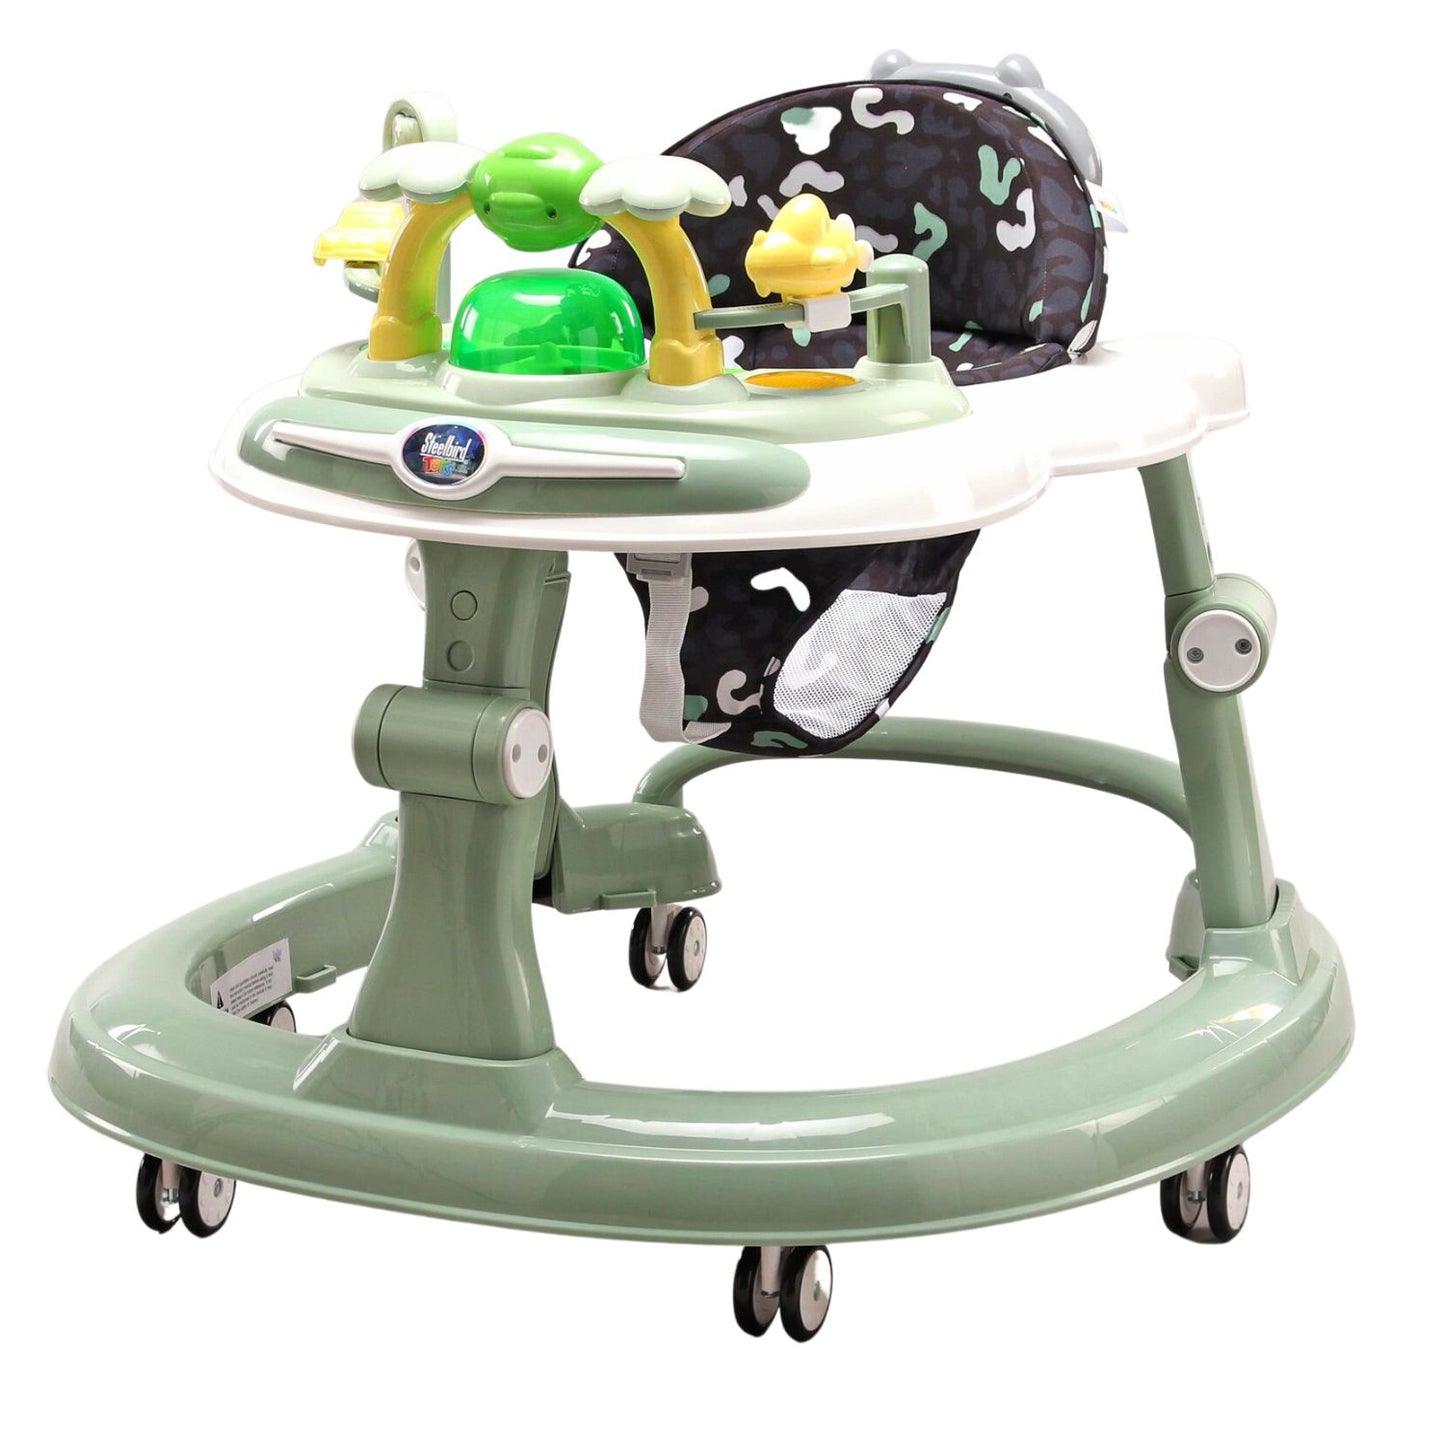 Steelbird Premium Adjustable Baby Walker with Fun and Learning Toys with Light and Music for 9 Month to 3 Years - Green